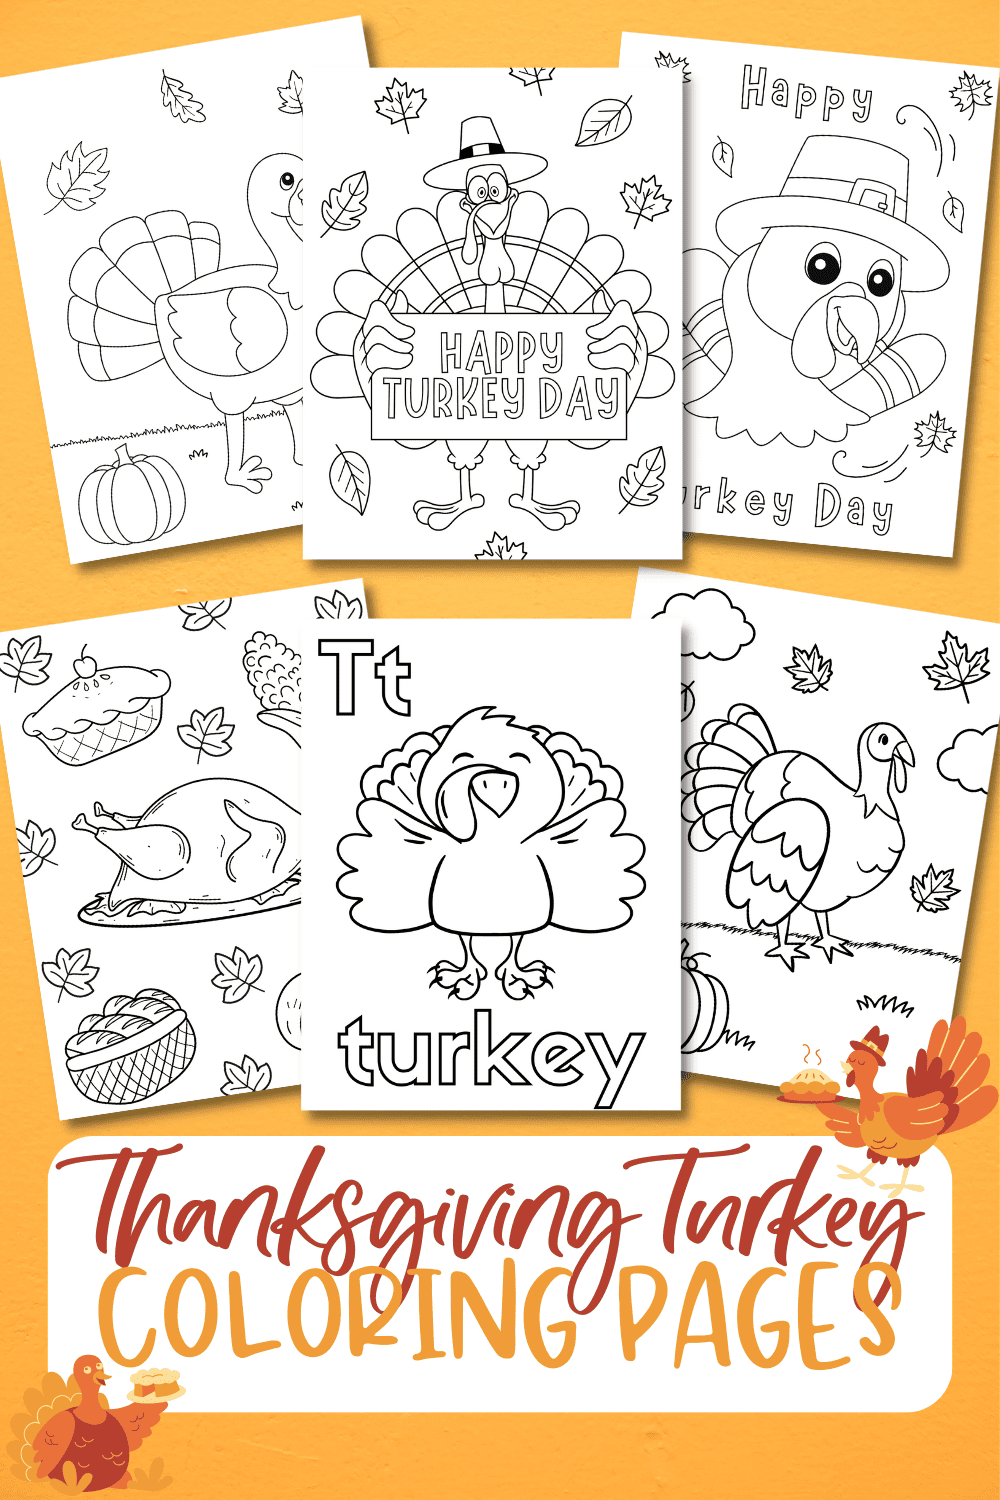 Free thanksgiving turkey coloring pages for kids